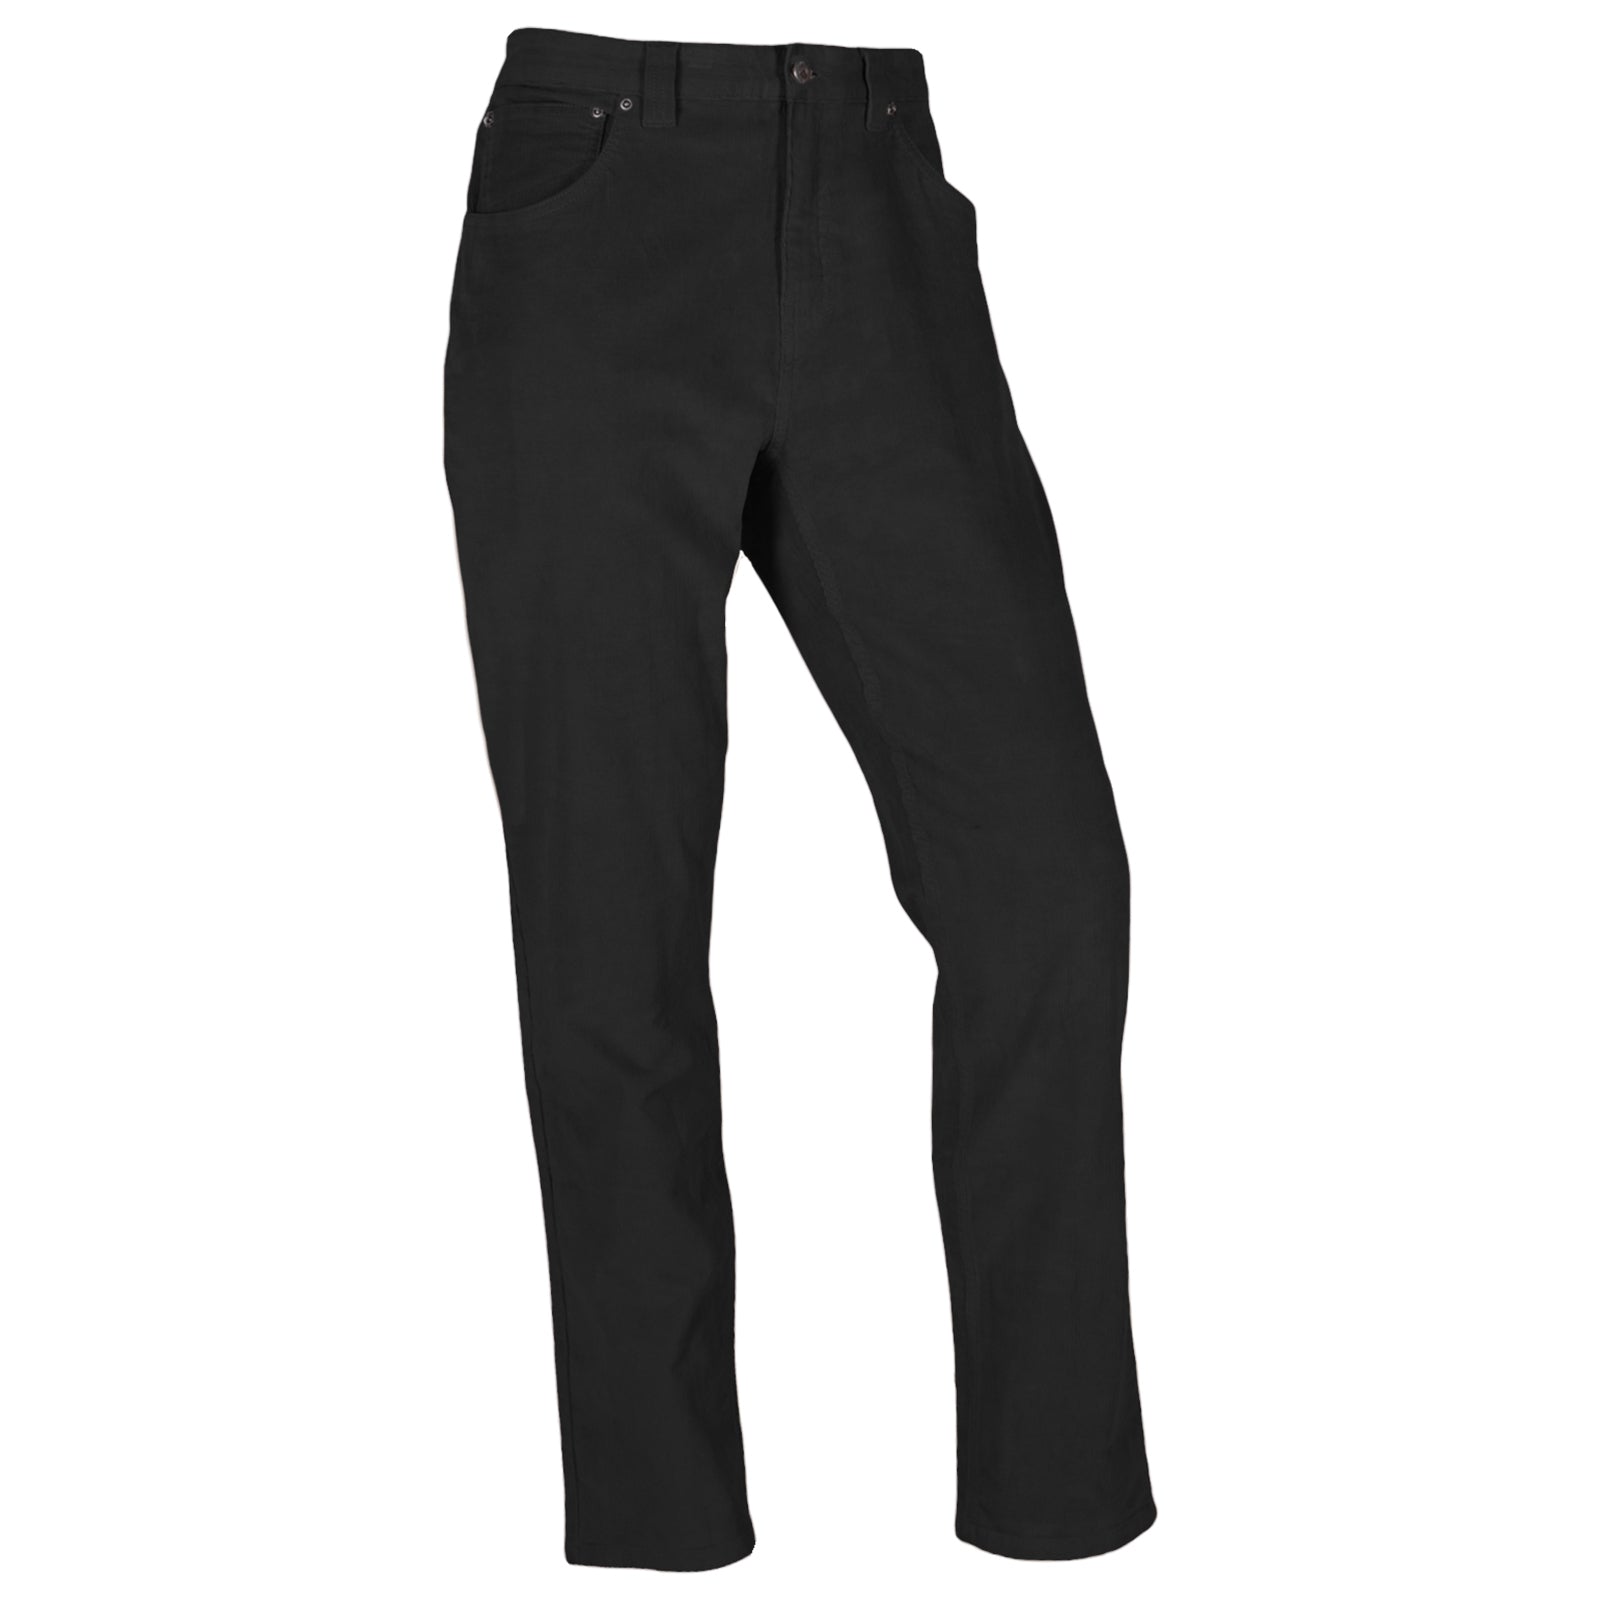 5 Black Pants Outfits For Men – LIFESTYLE BY PS